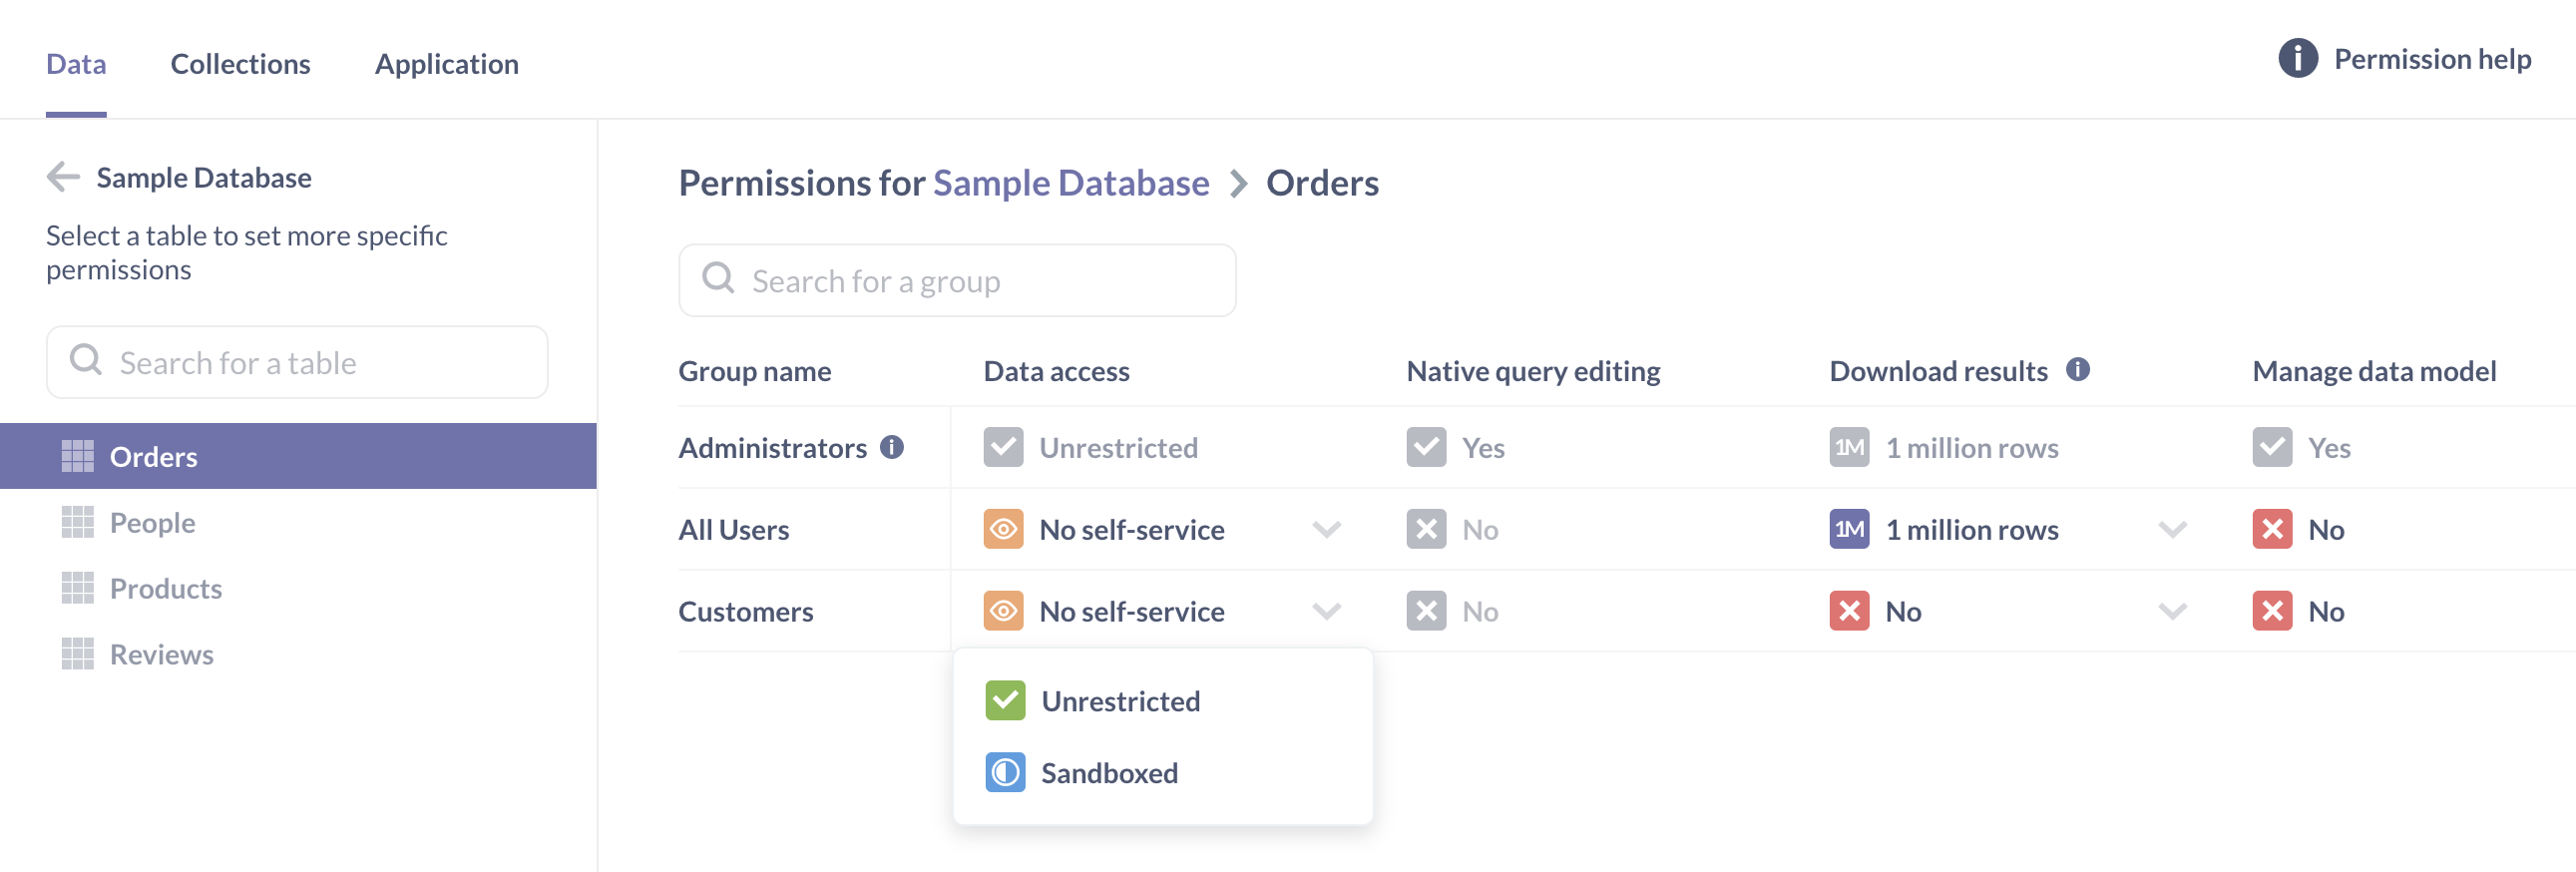 Granting sandboxed access to the Customer group for the Orders table.